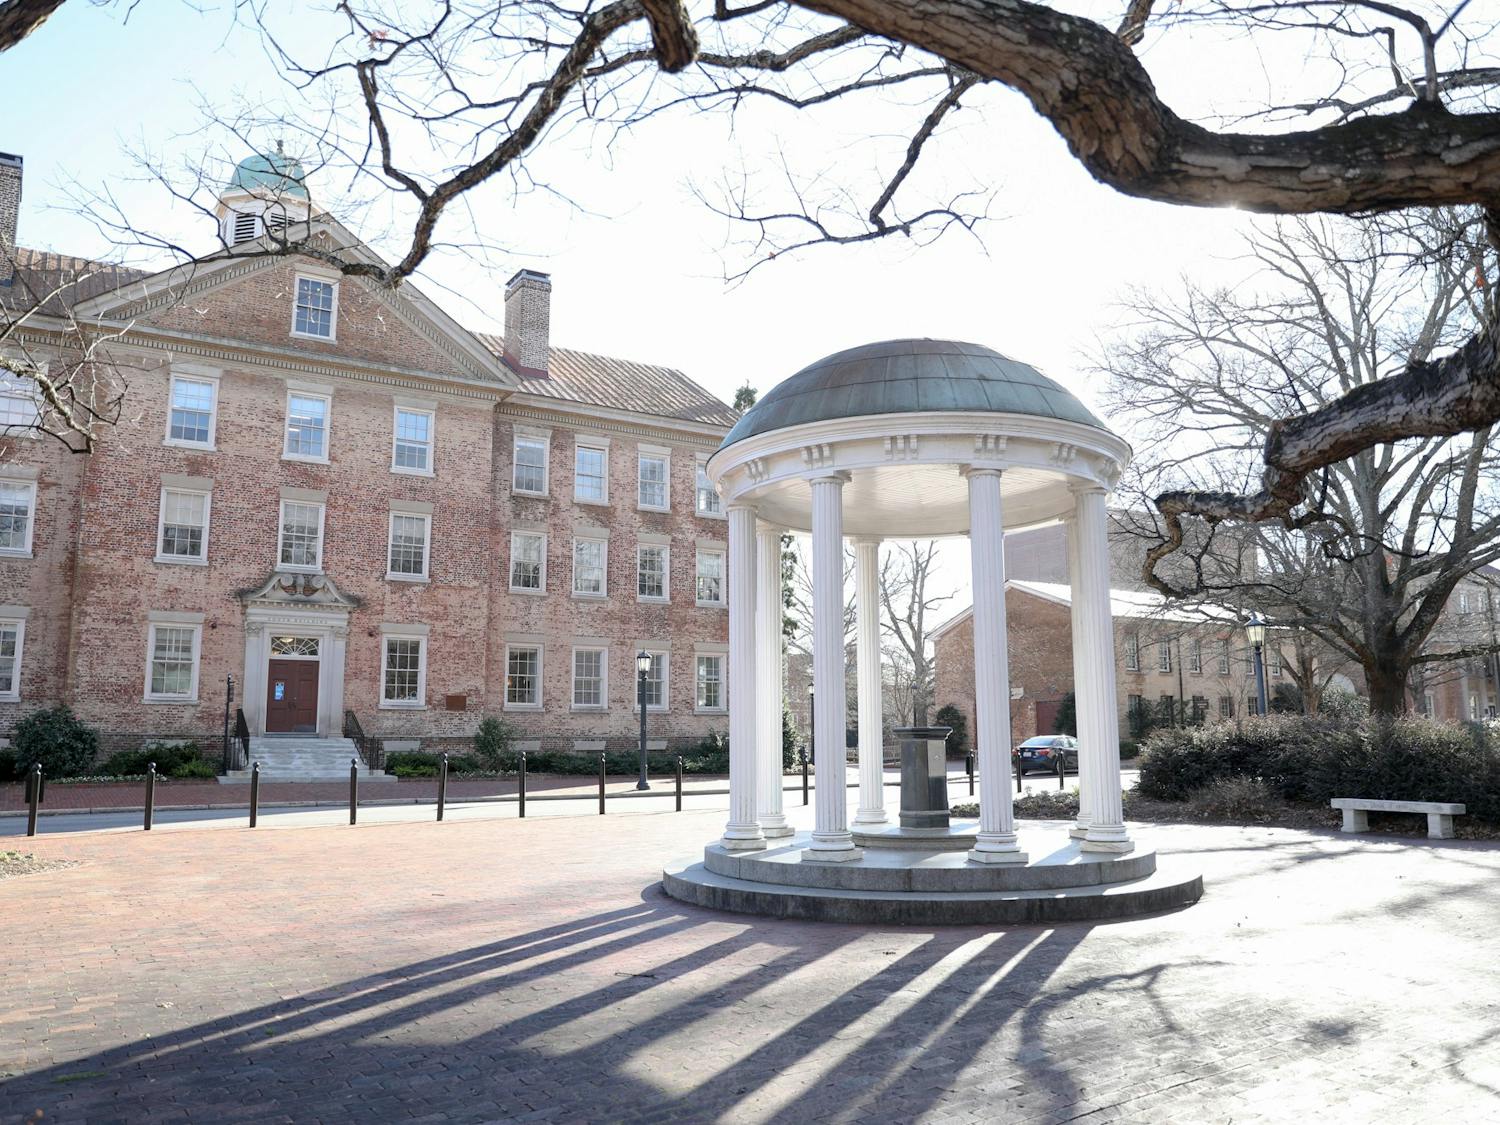 The back entrance of South Building and the Old Well are pictured on Thursday, Jan. 6, 2022.